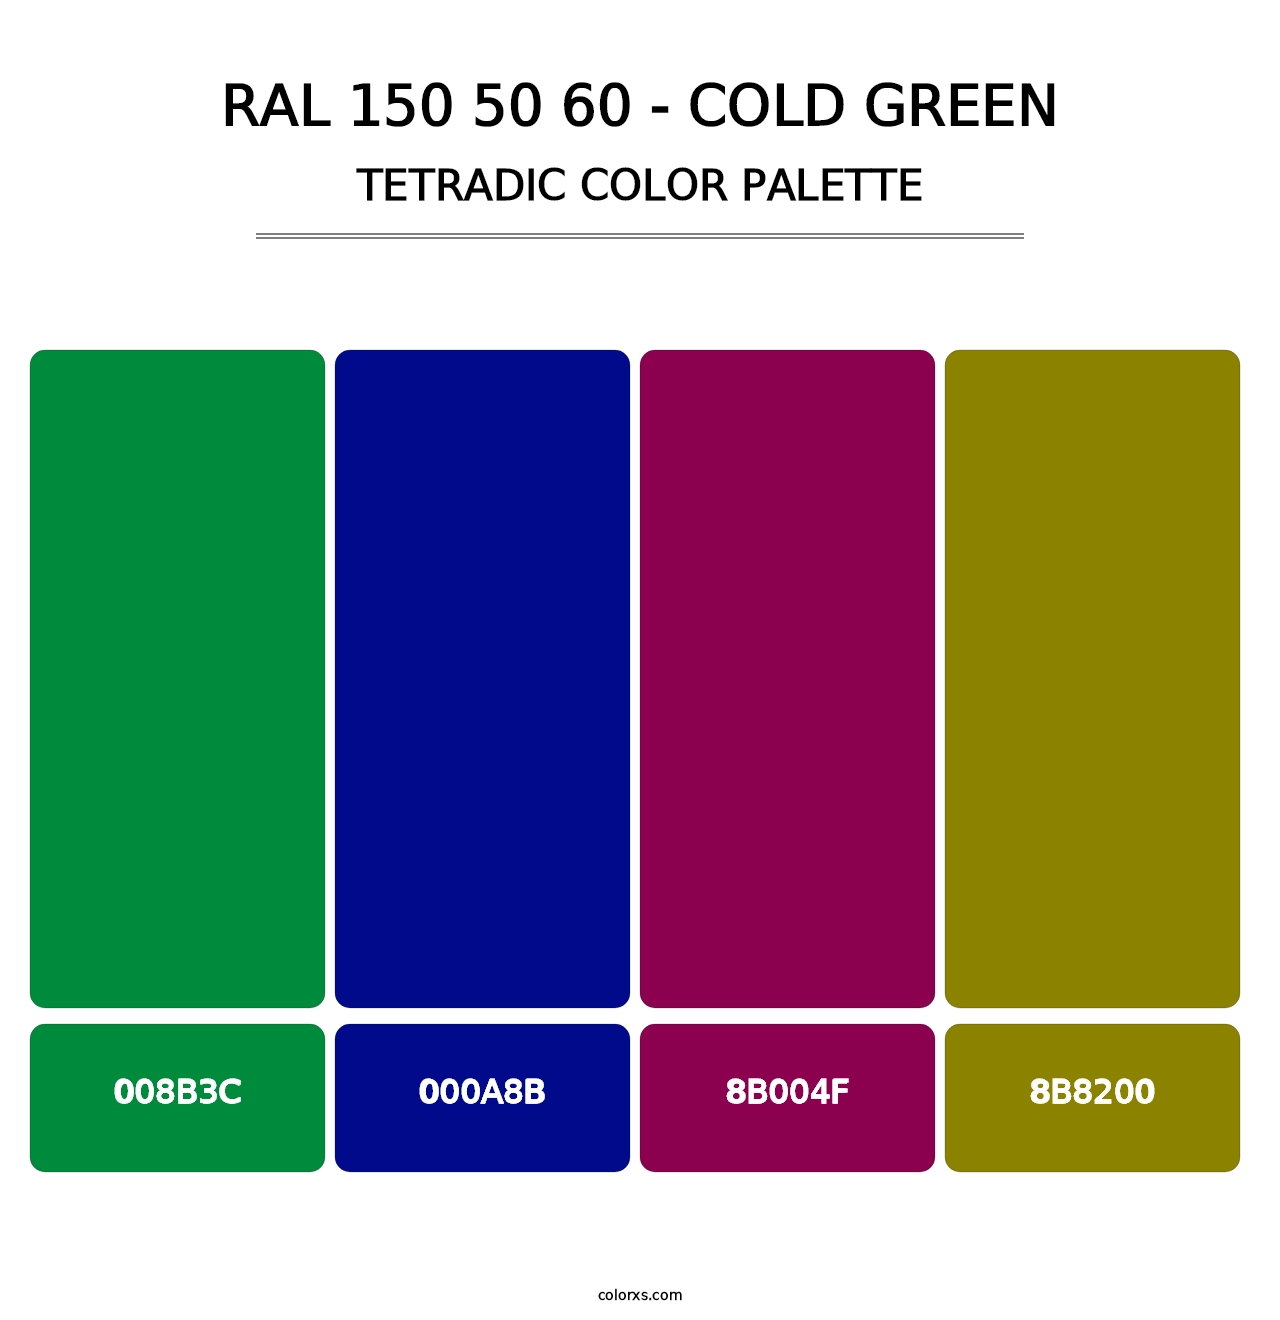 RAL 150 50 60 - Cold Green - Tetradic Color Palette